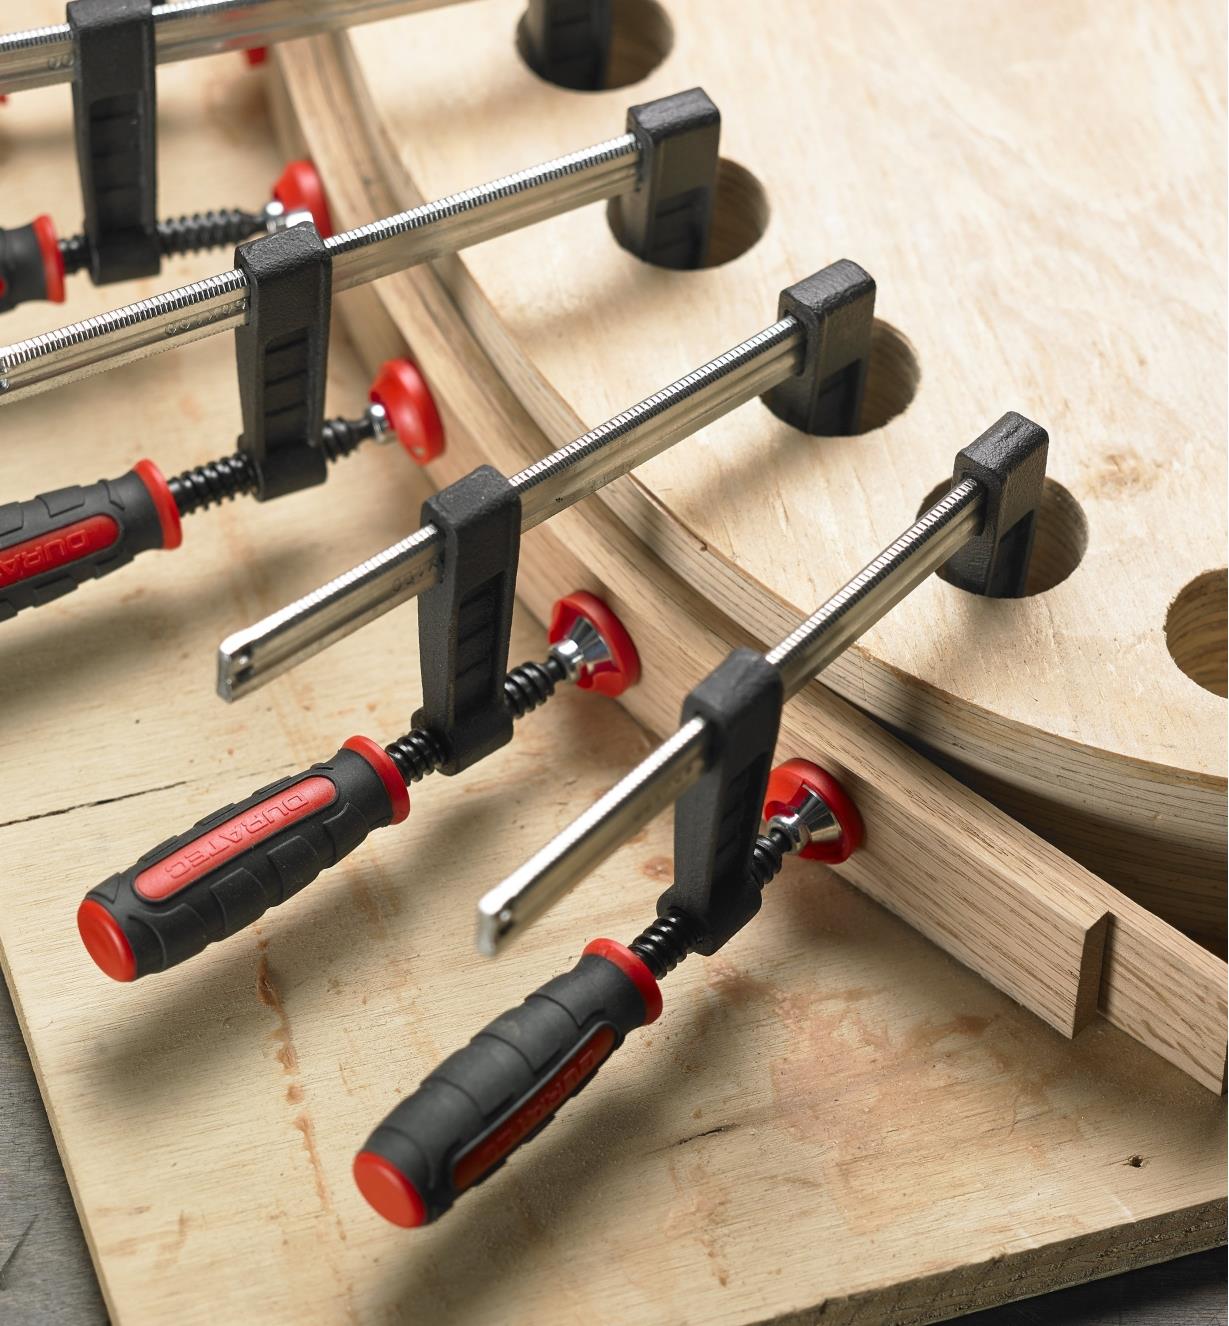 Multiple 4" light-duty fast-acting clamps grip a bent lamination